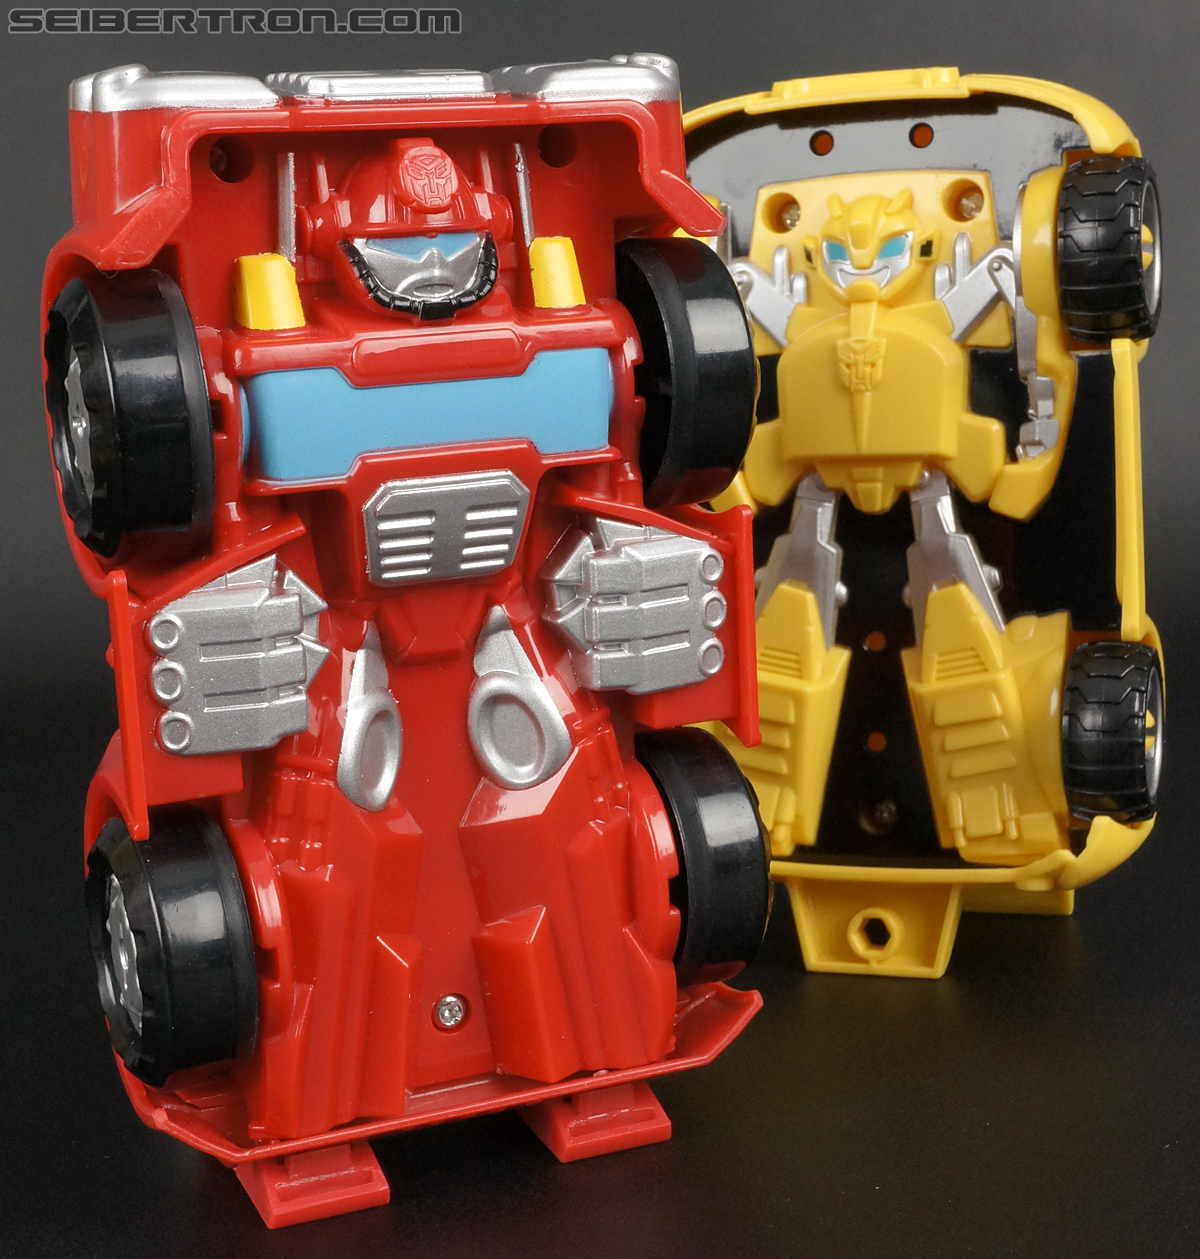 Transformers Rescue Bots Heatwave the Fire-Bot (Fire Station Prime) (Image #64 of 64)